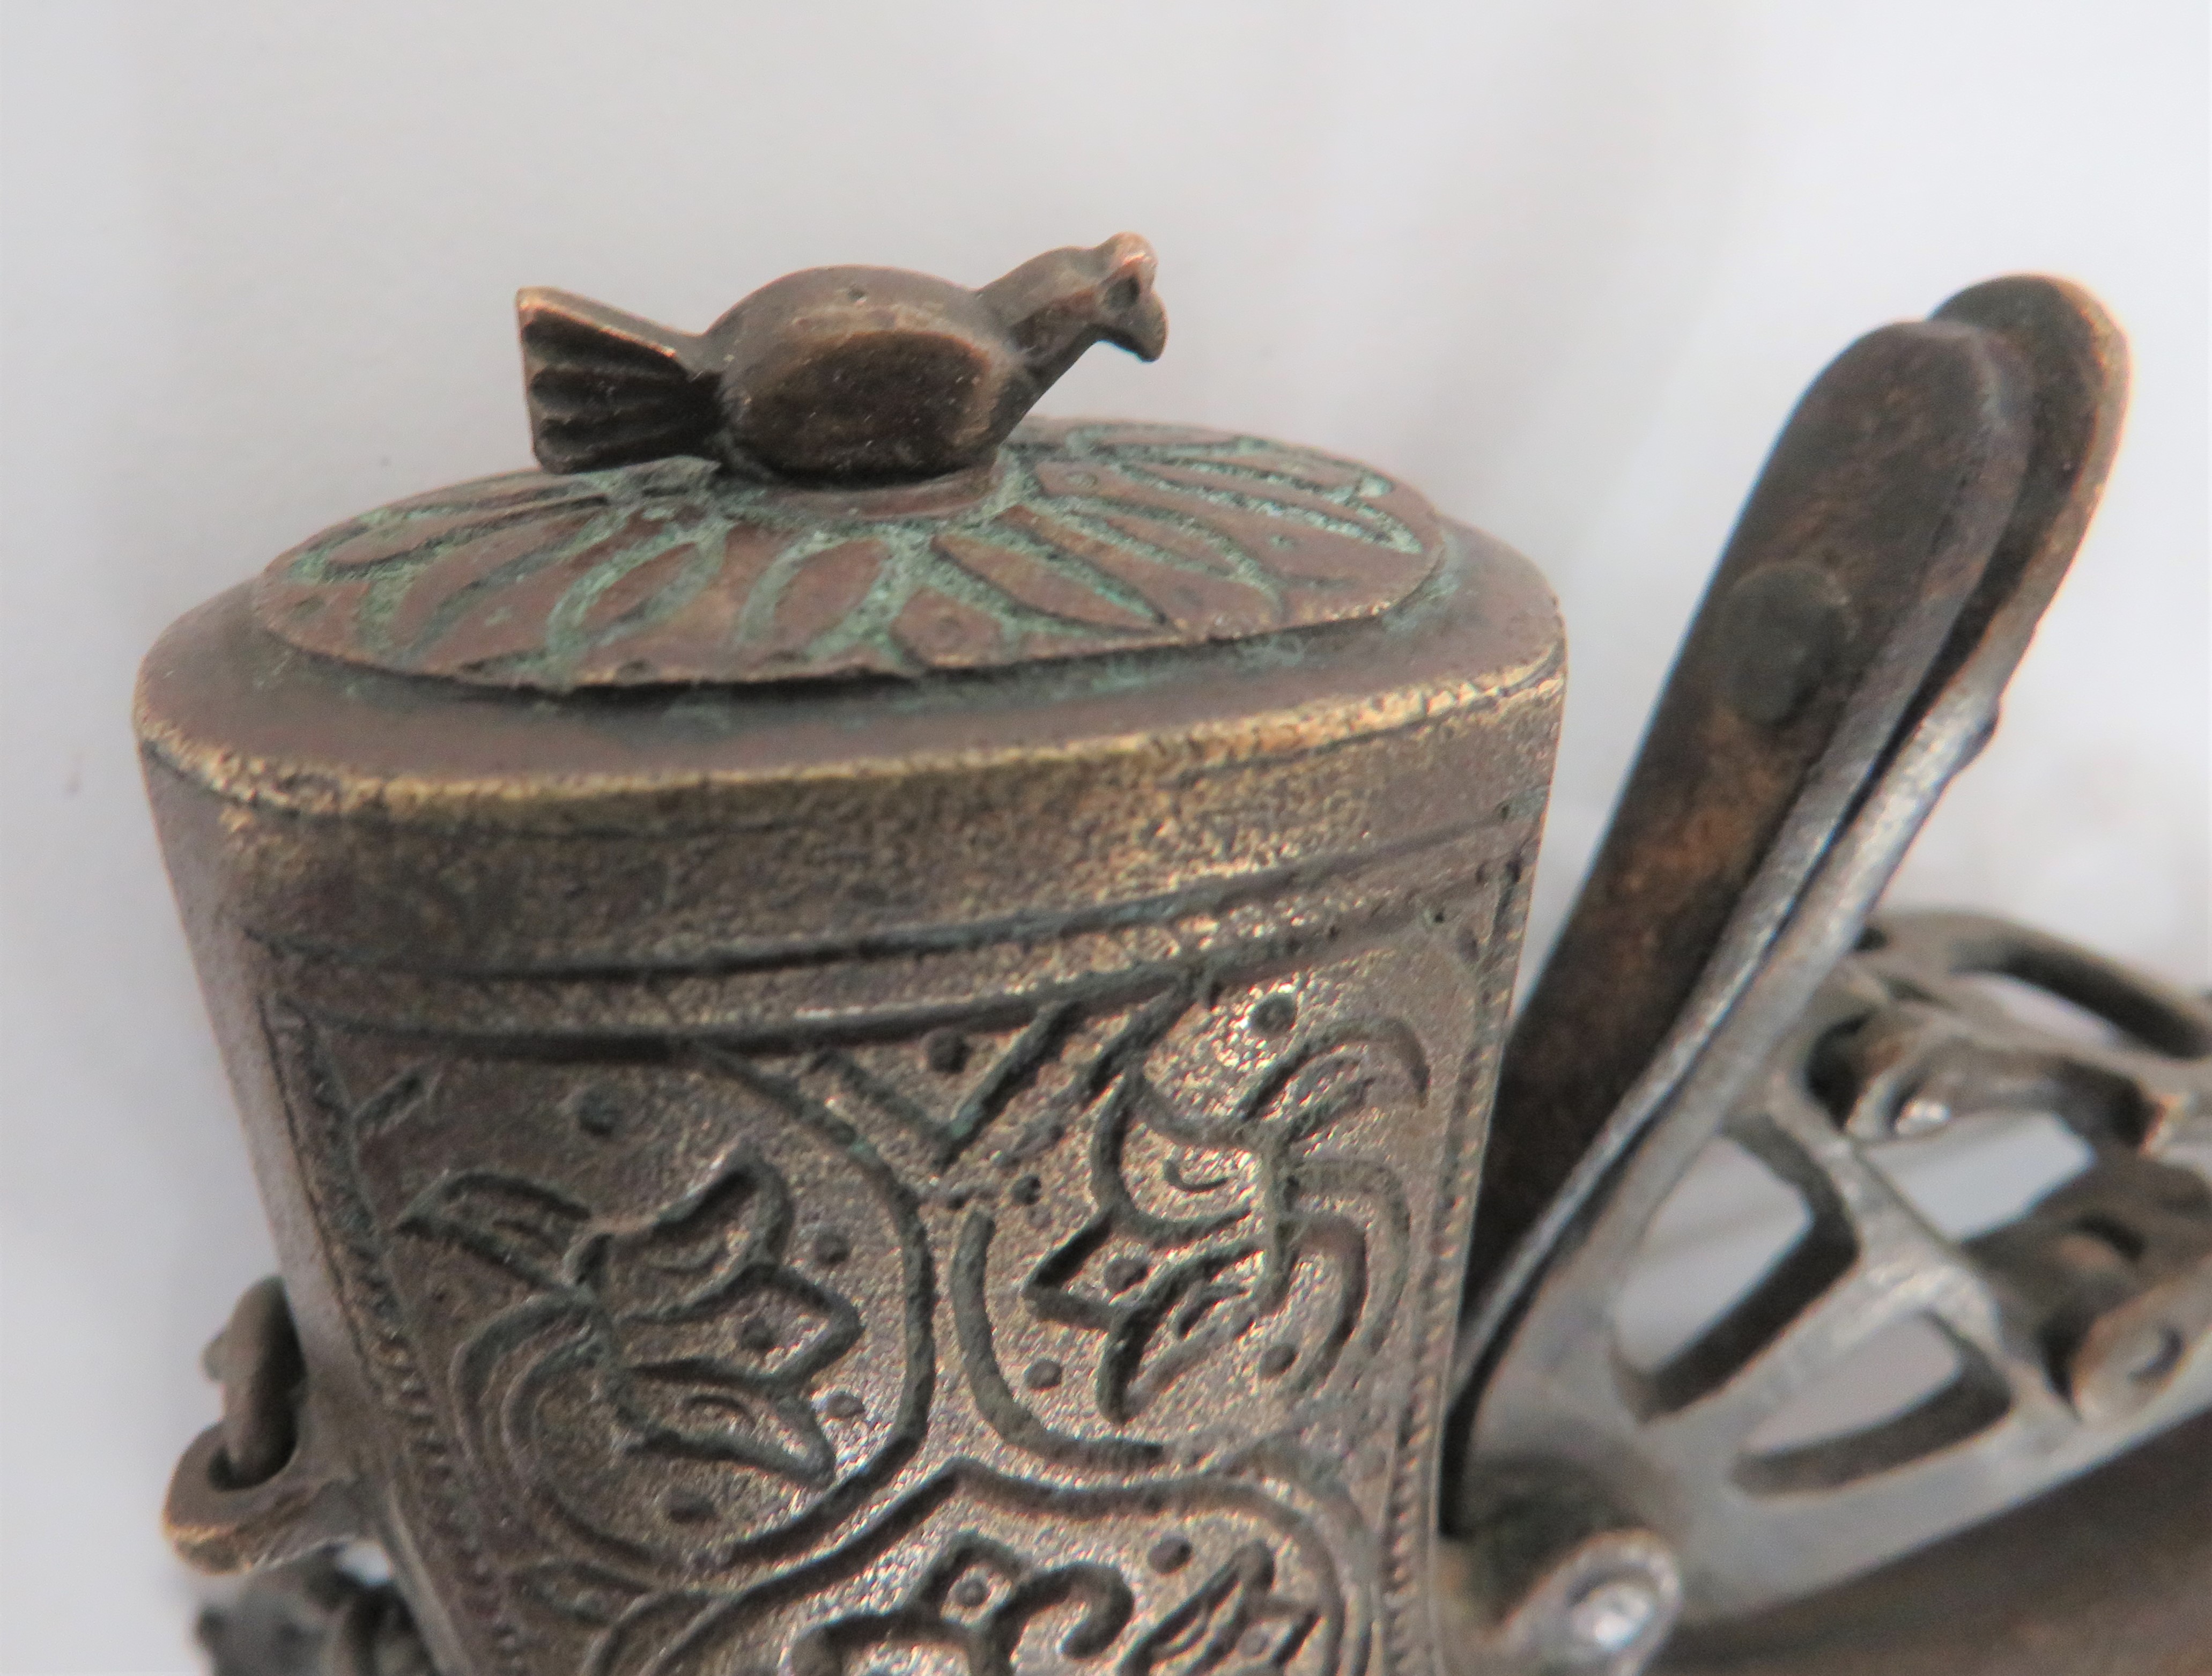 19th Century Indian Priming Flask heavily curved, small brass flask with engraved scroll foliage - Image 2 of 2